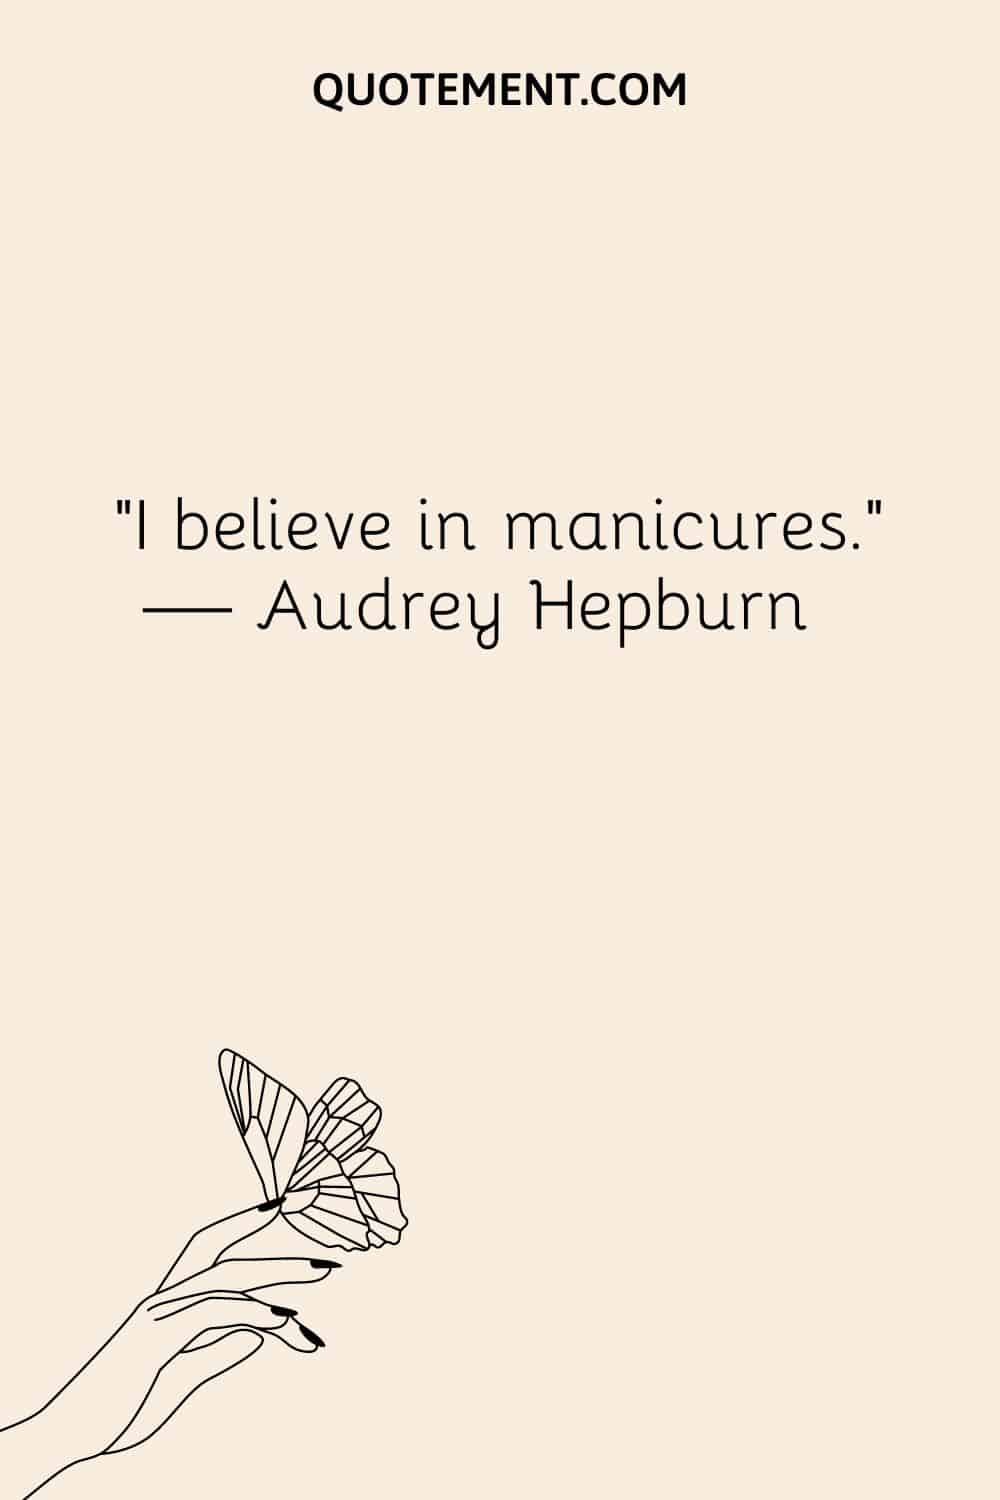 butterfly on a woman hand illustration representing nail quote